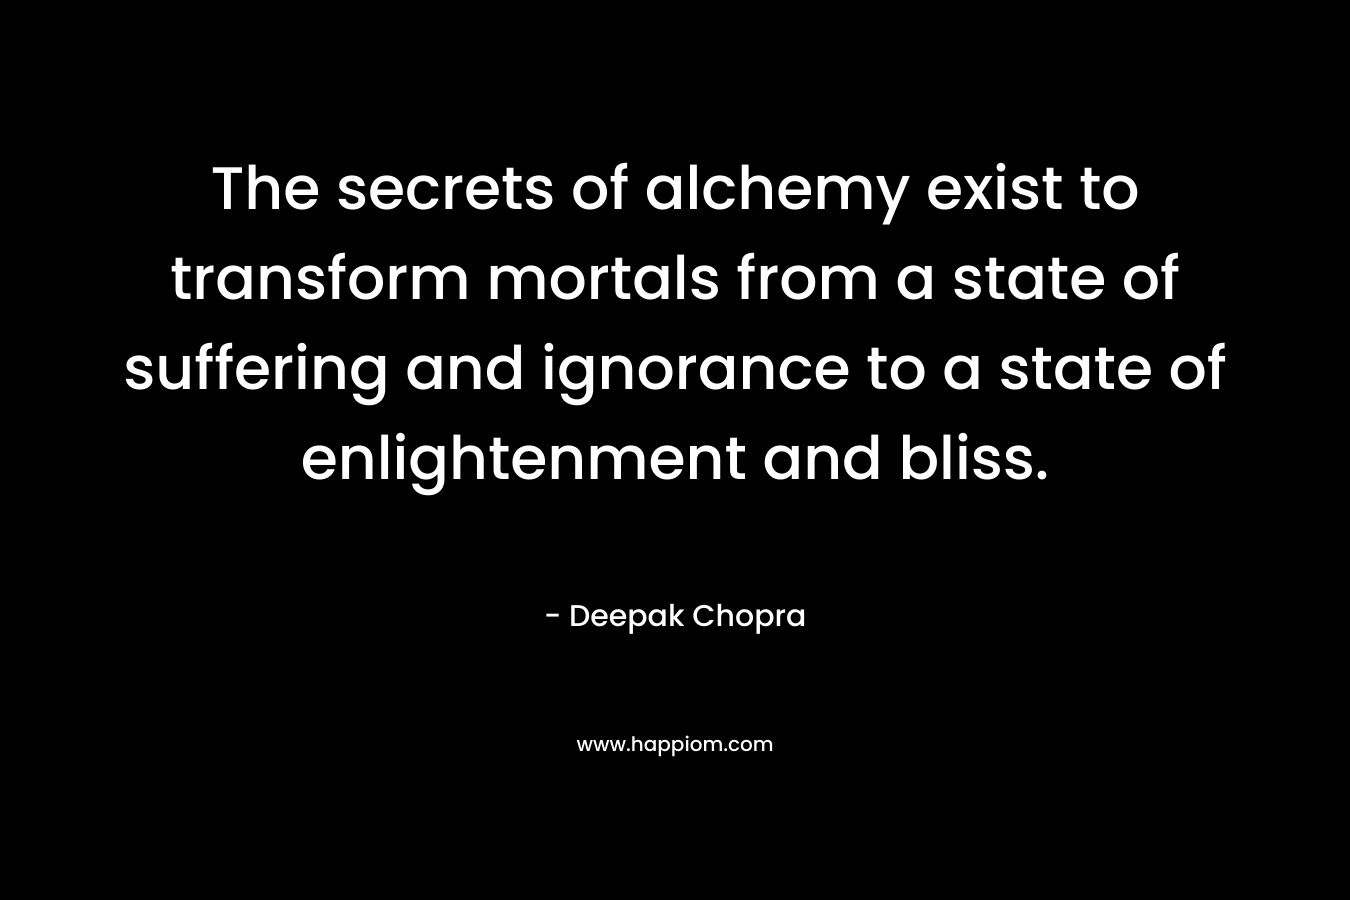 The secrets of alchemy exist to transform mortals from a state of suffering and ignorance to a state of enlightenment and bliss.